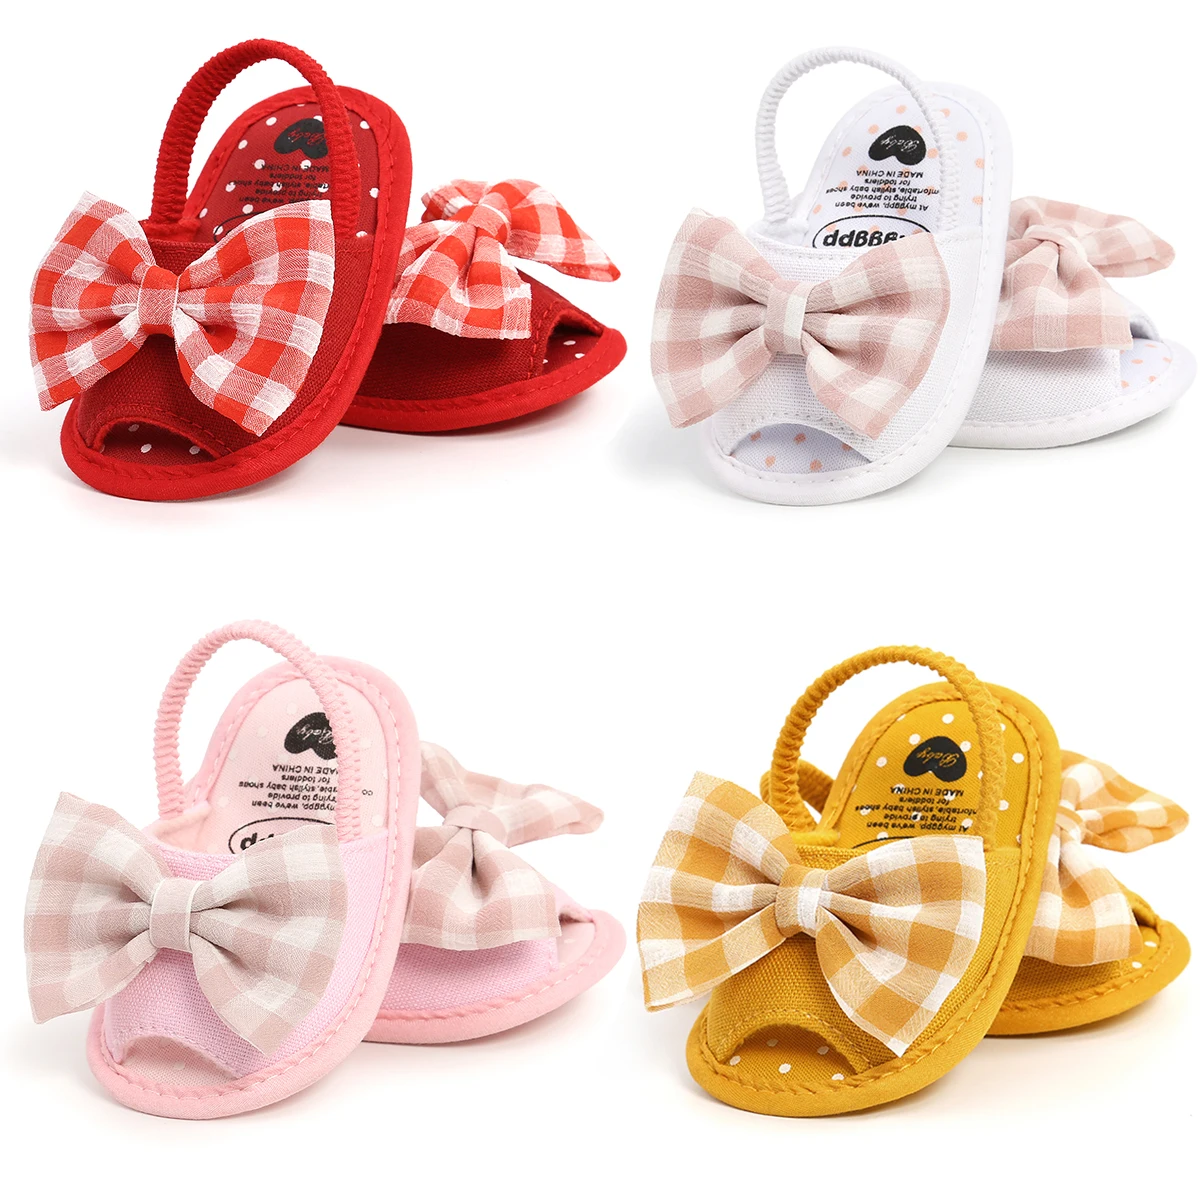 

Baby Girls Summer Sandals Plaid Bowknot Open-Toe Elastic Sandals with Nonslip Soles for Toddlers 0-18 Months